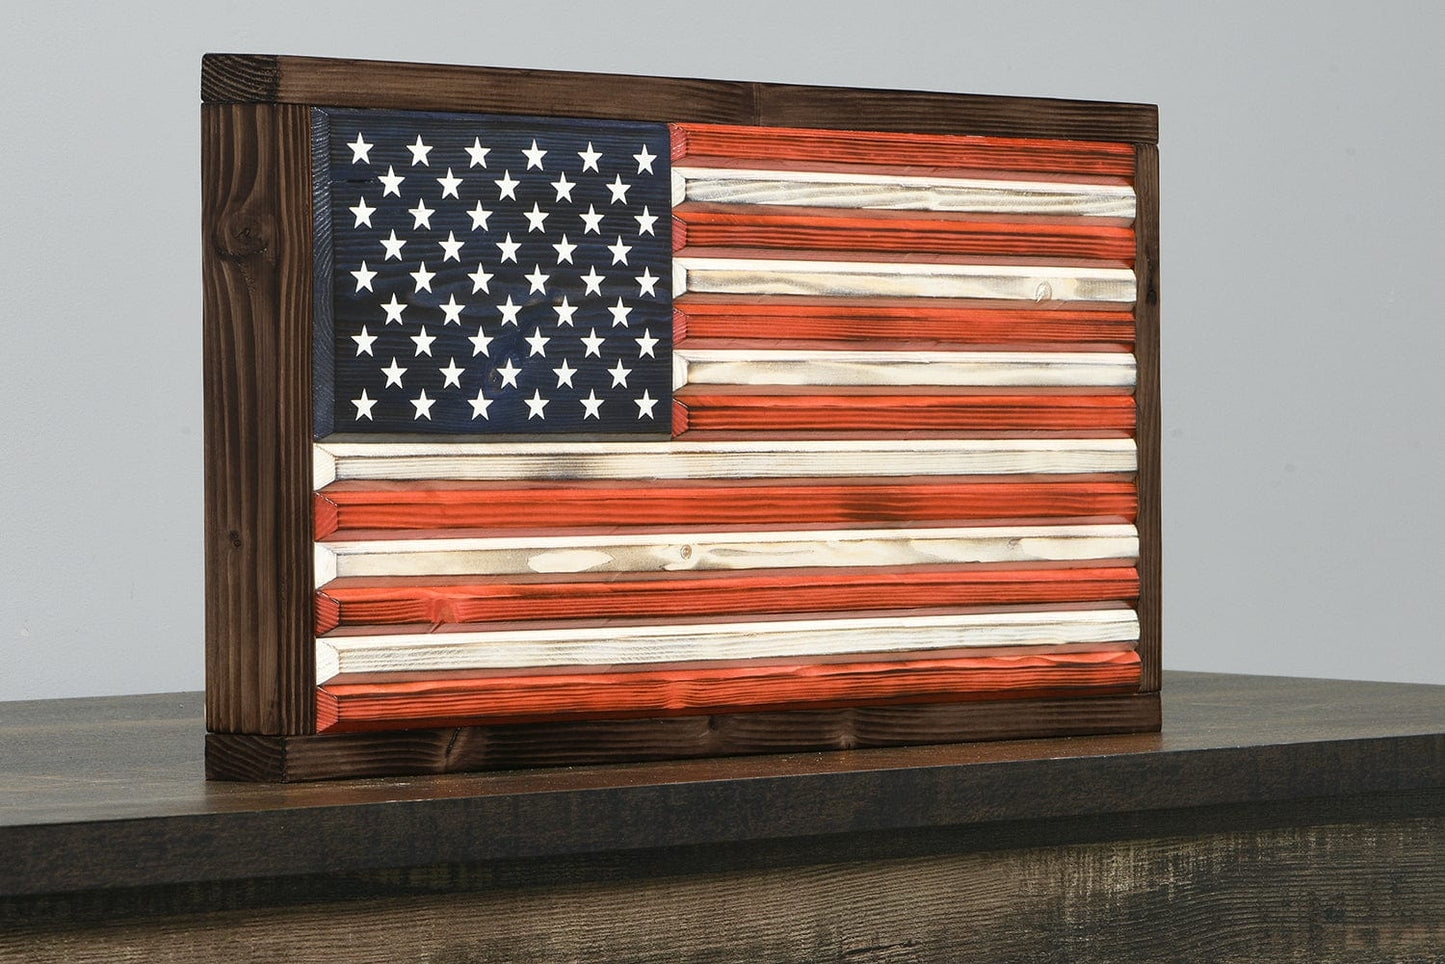 Framed Rustic Wooden American Flag, Handcrafted Woodworking by Eric